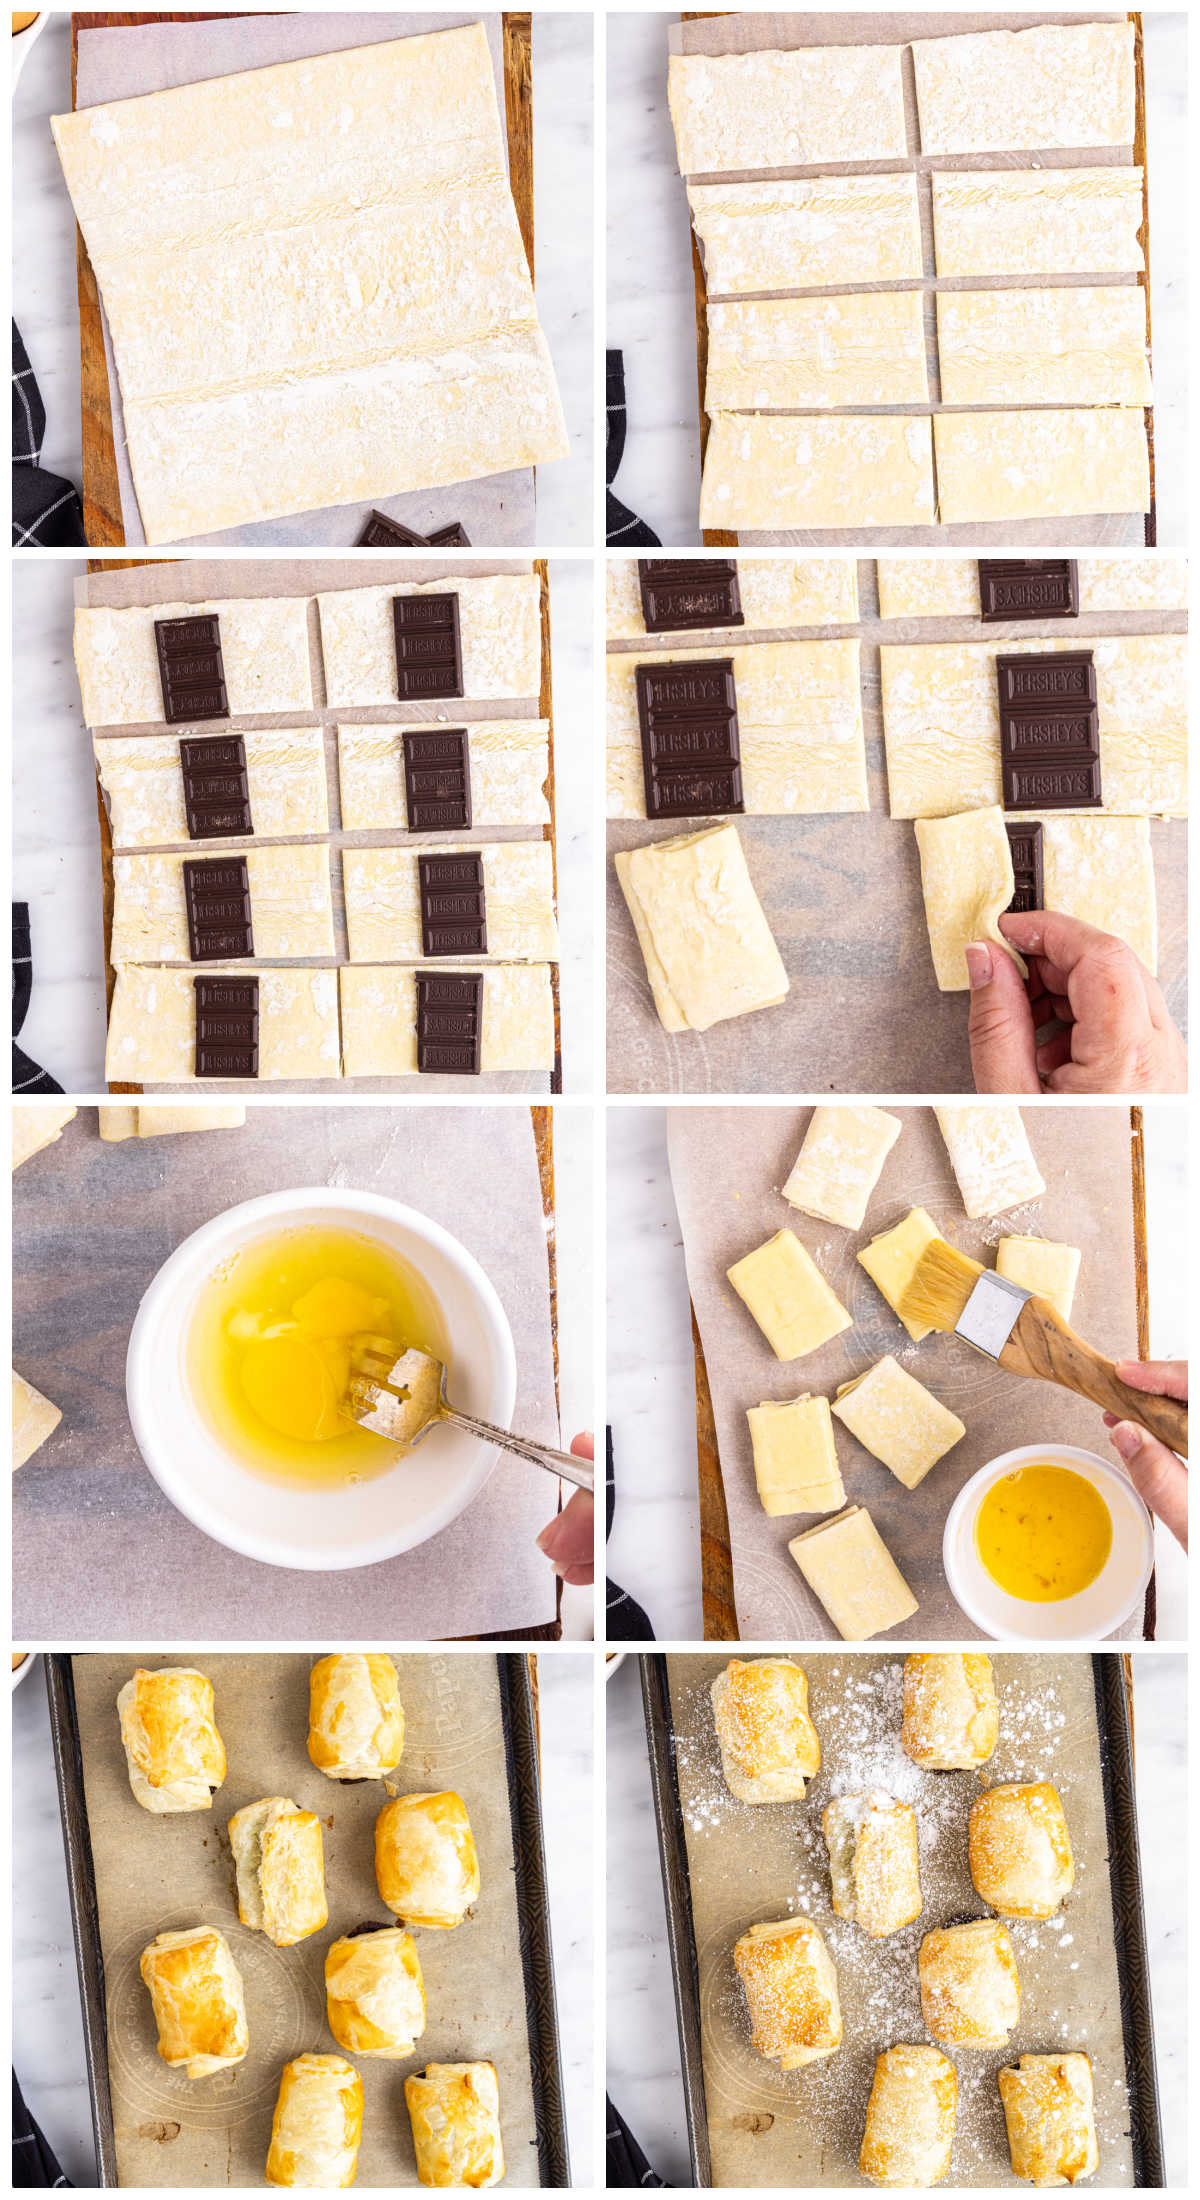 A picture collage showing How To Make Chocolate Croissants With Puff Pastry.